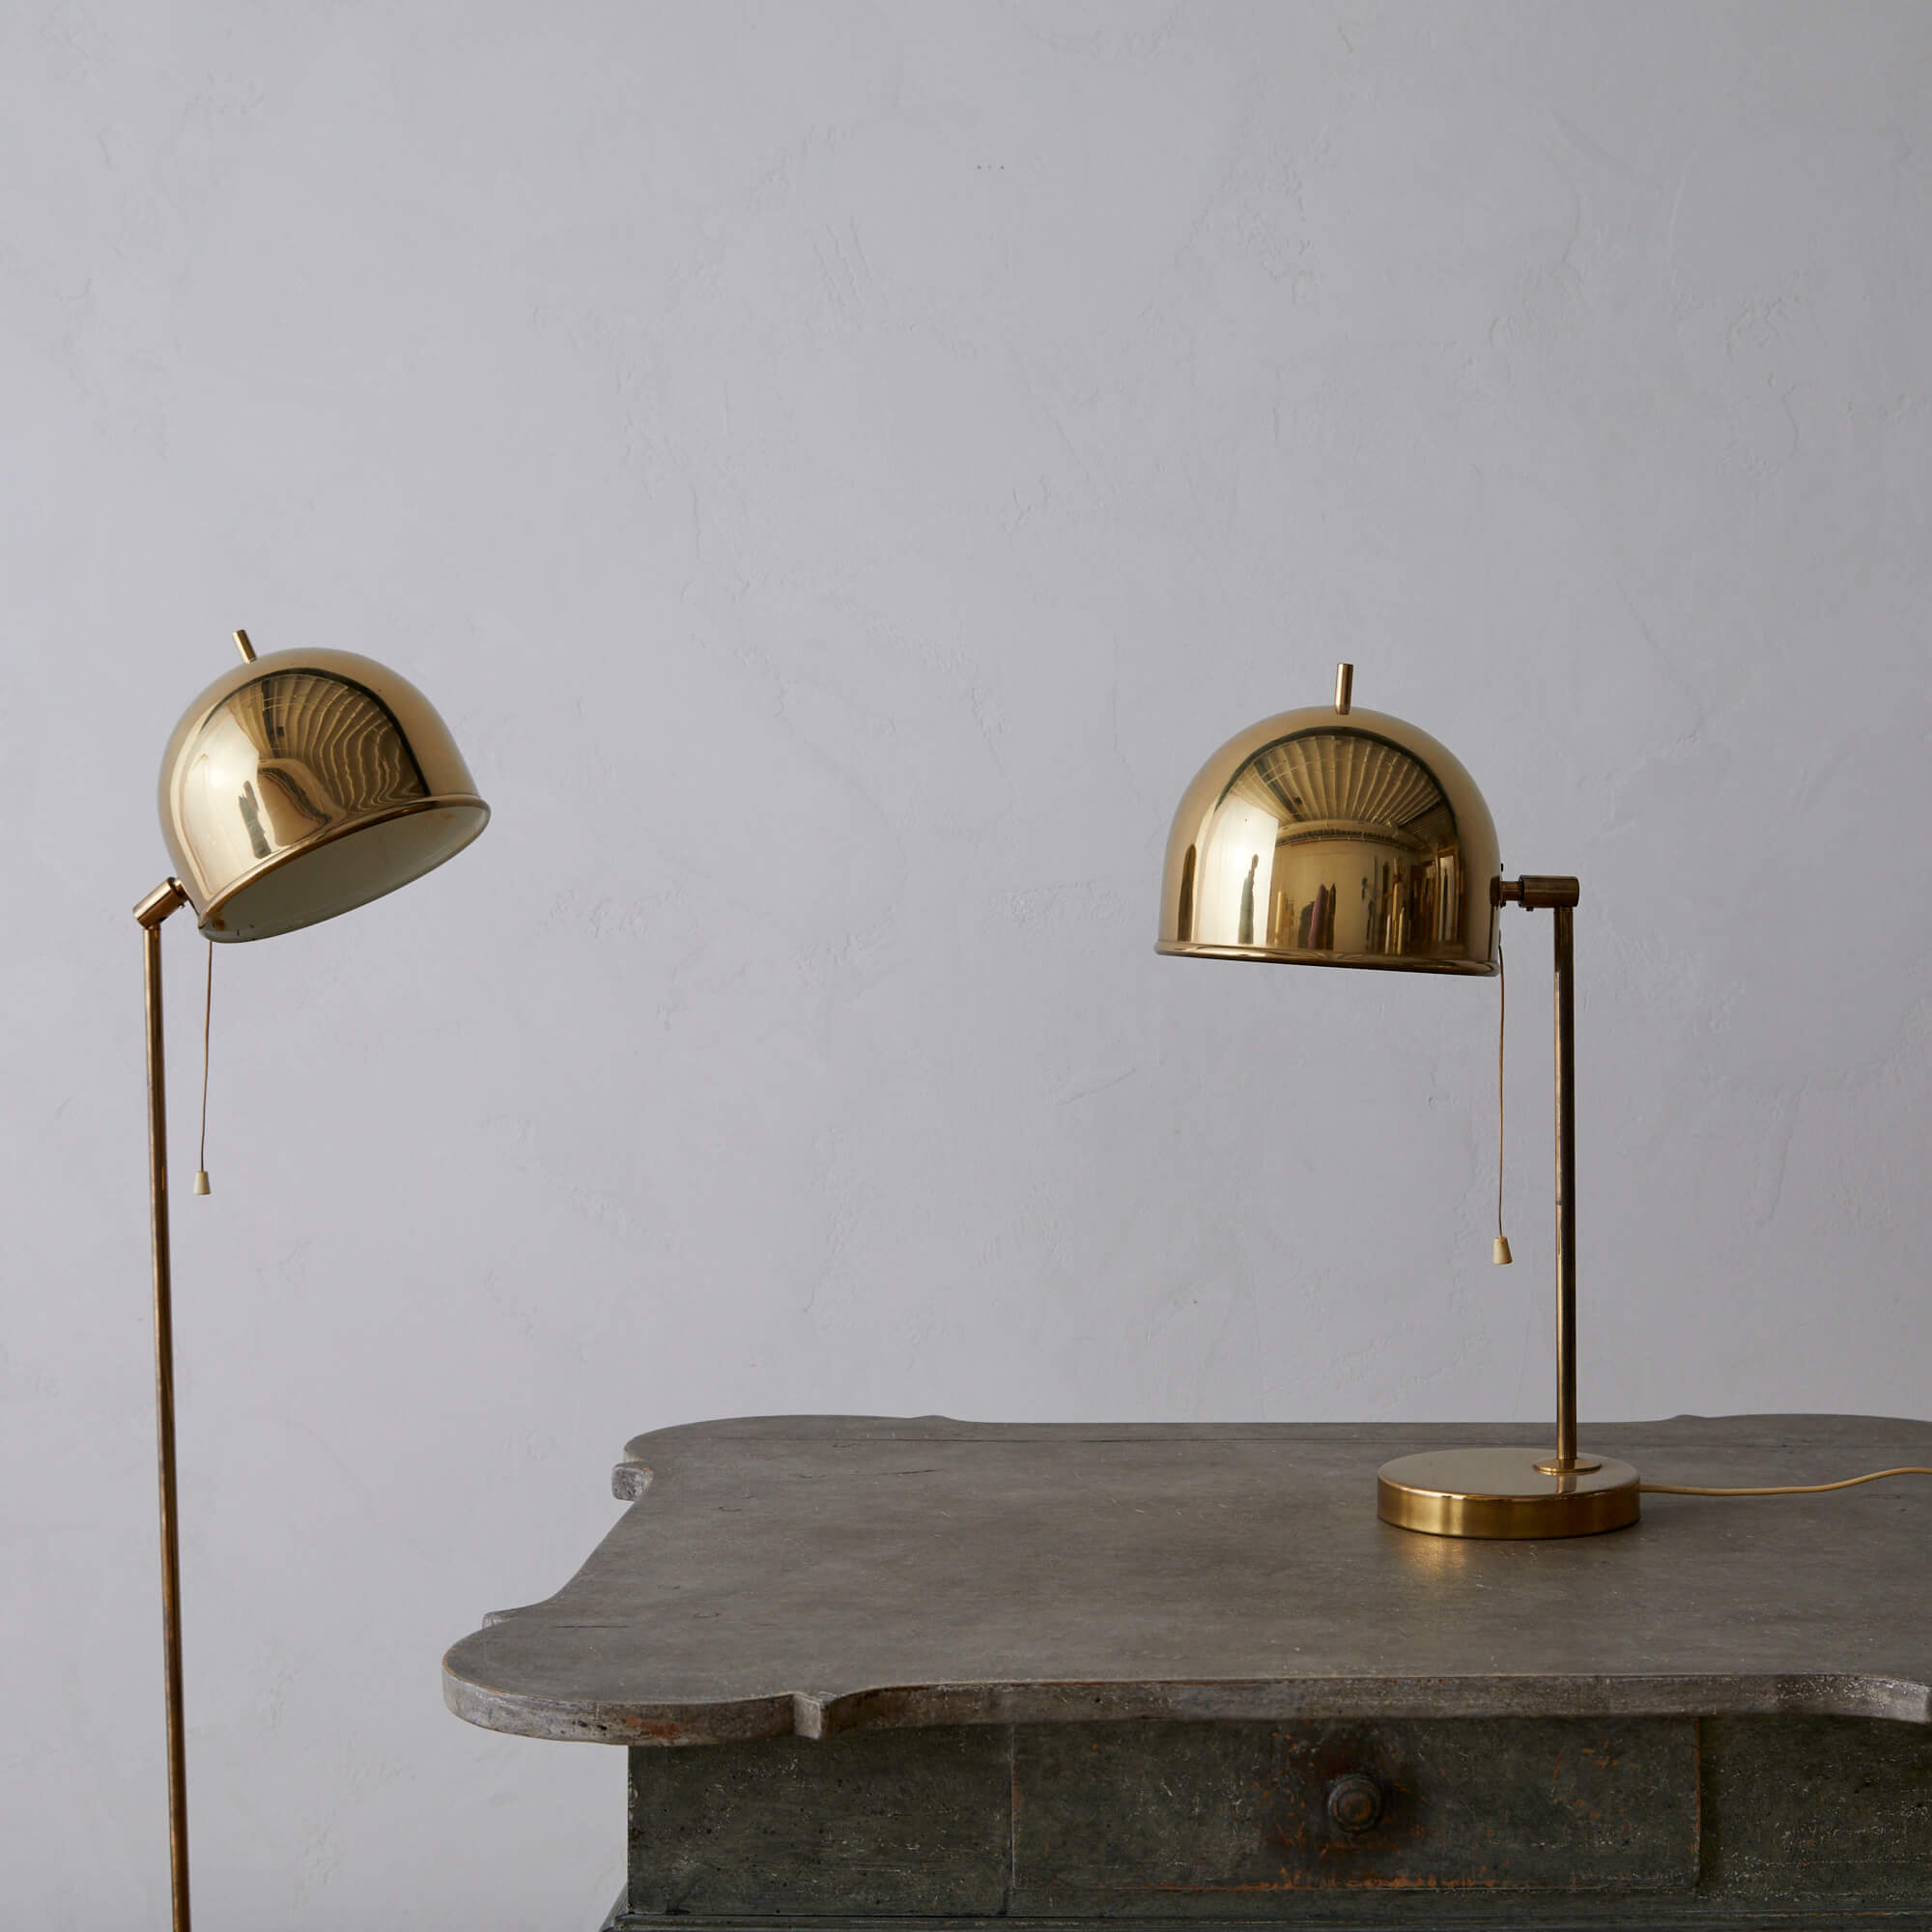 Floor lamp and table lamp by Eje Ahlgren for Bergboms